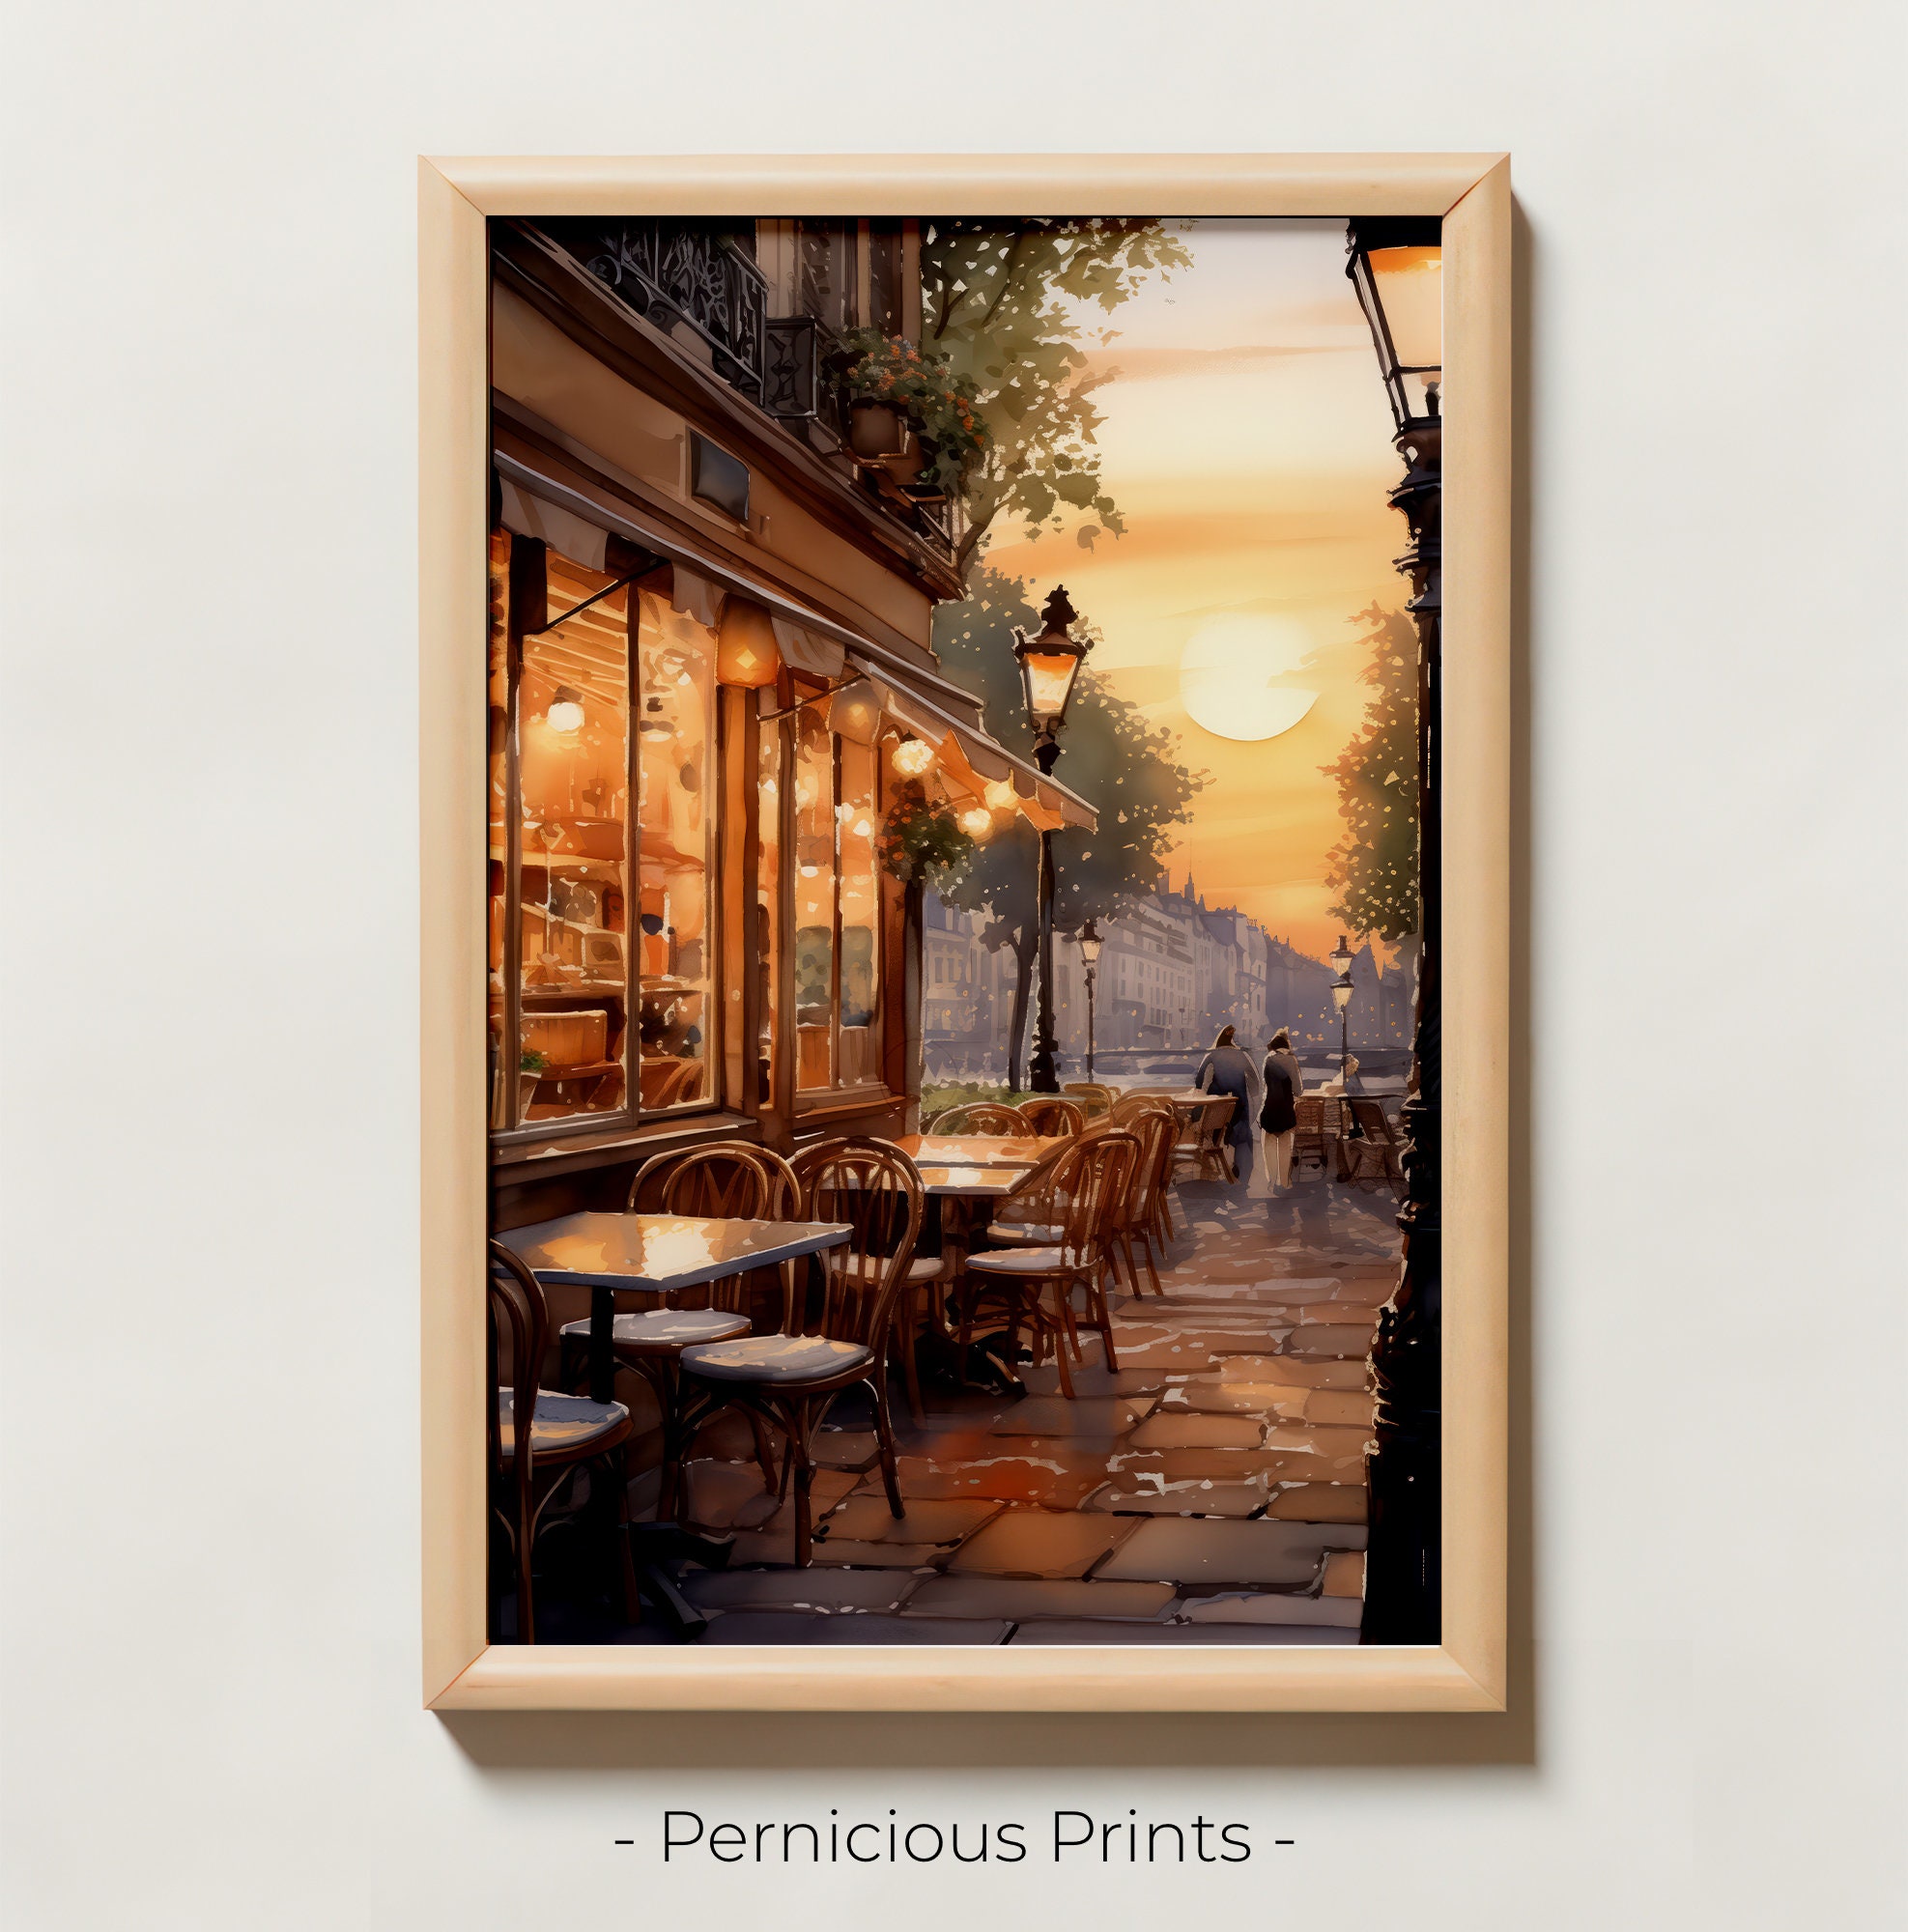 European Cafe Painting at Sunset Restaurant Cafe Outdoor Dining Dinner ...